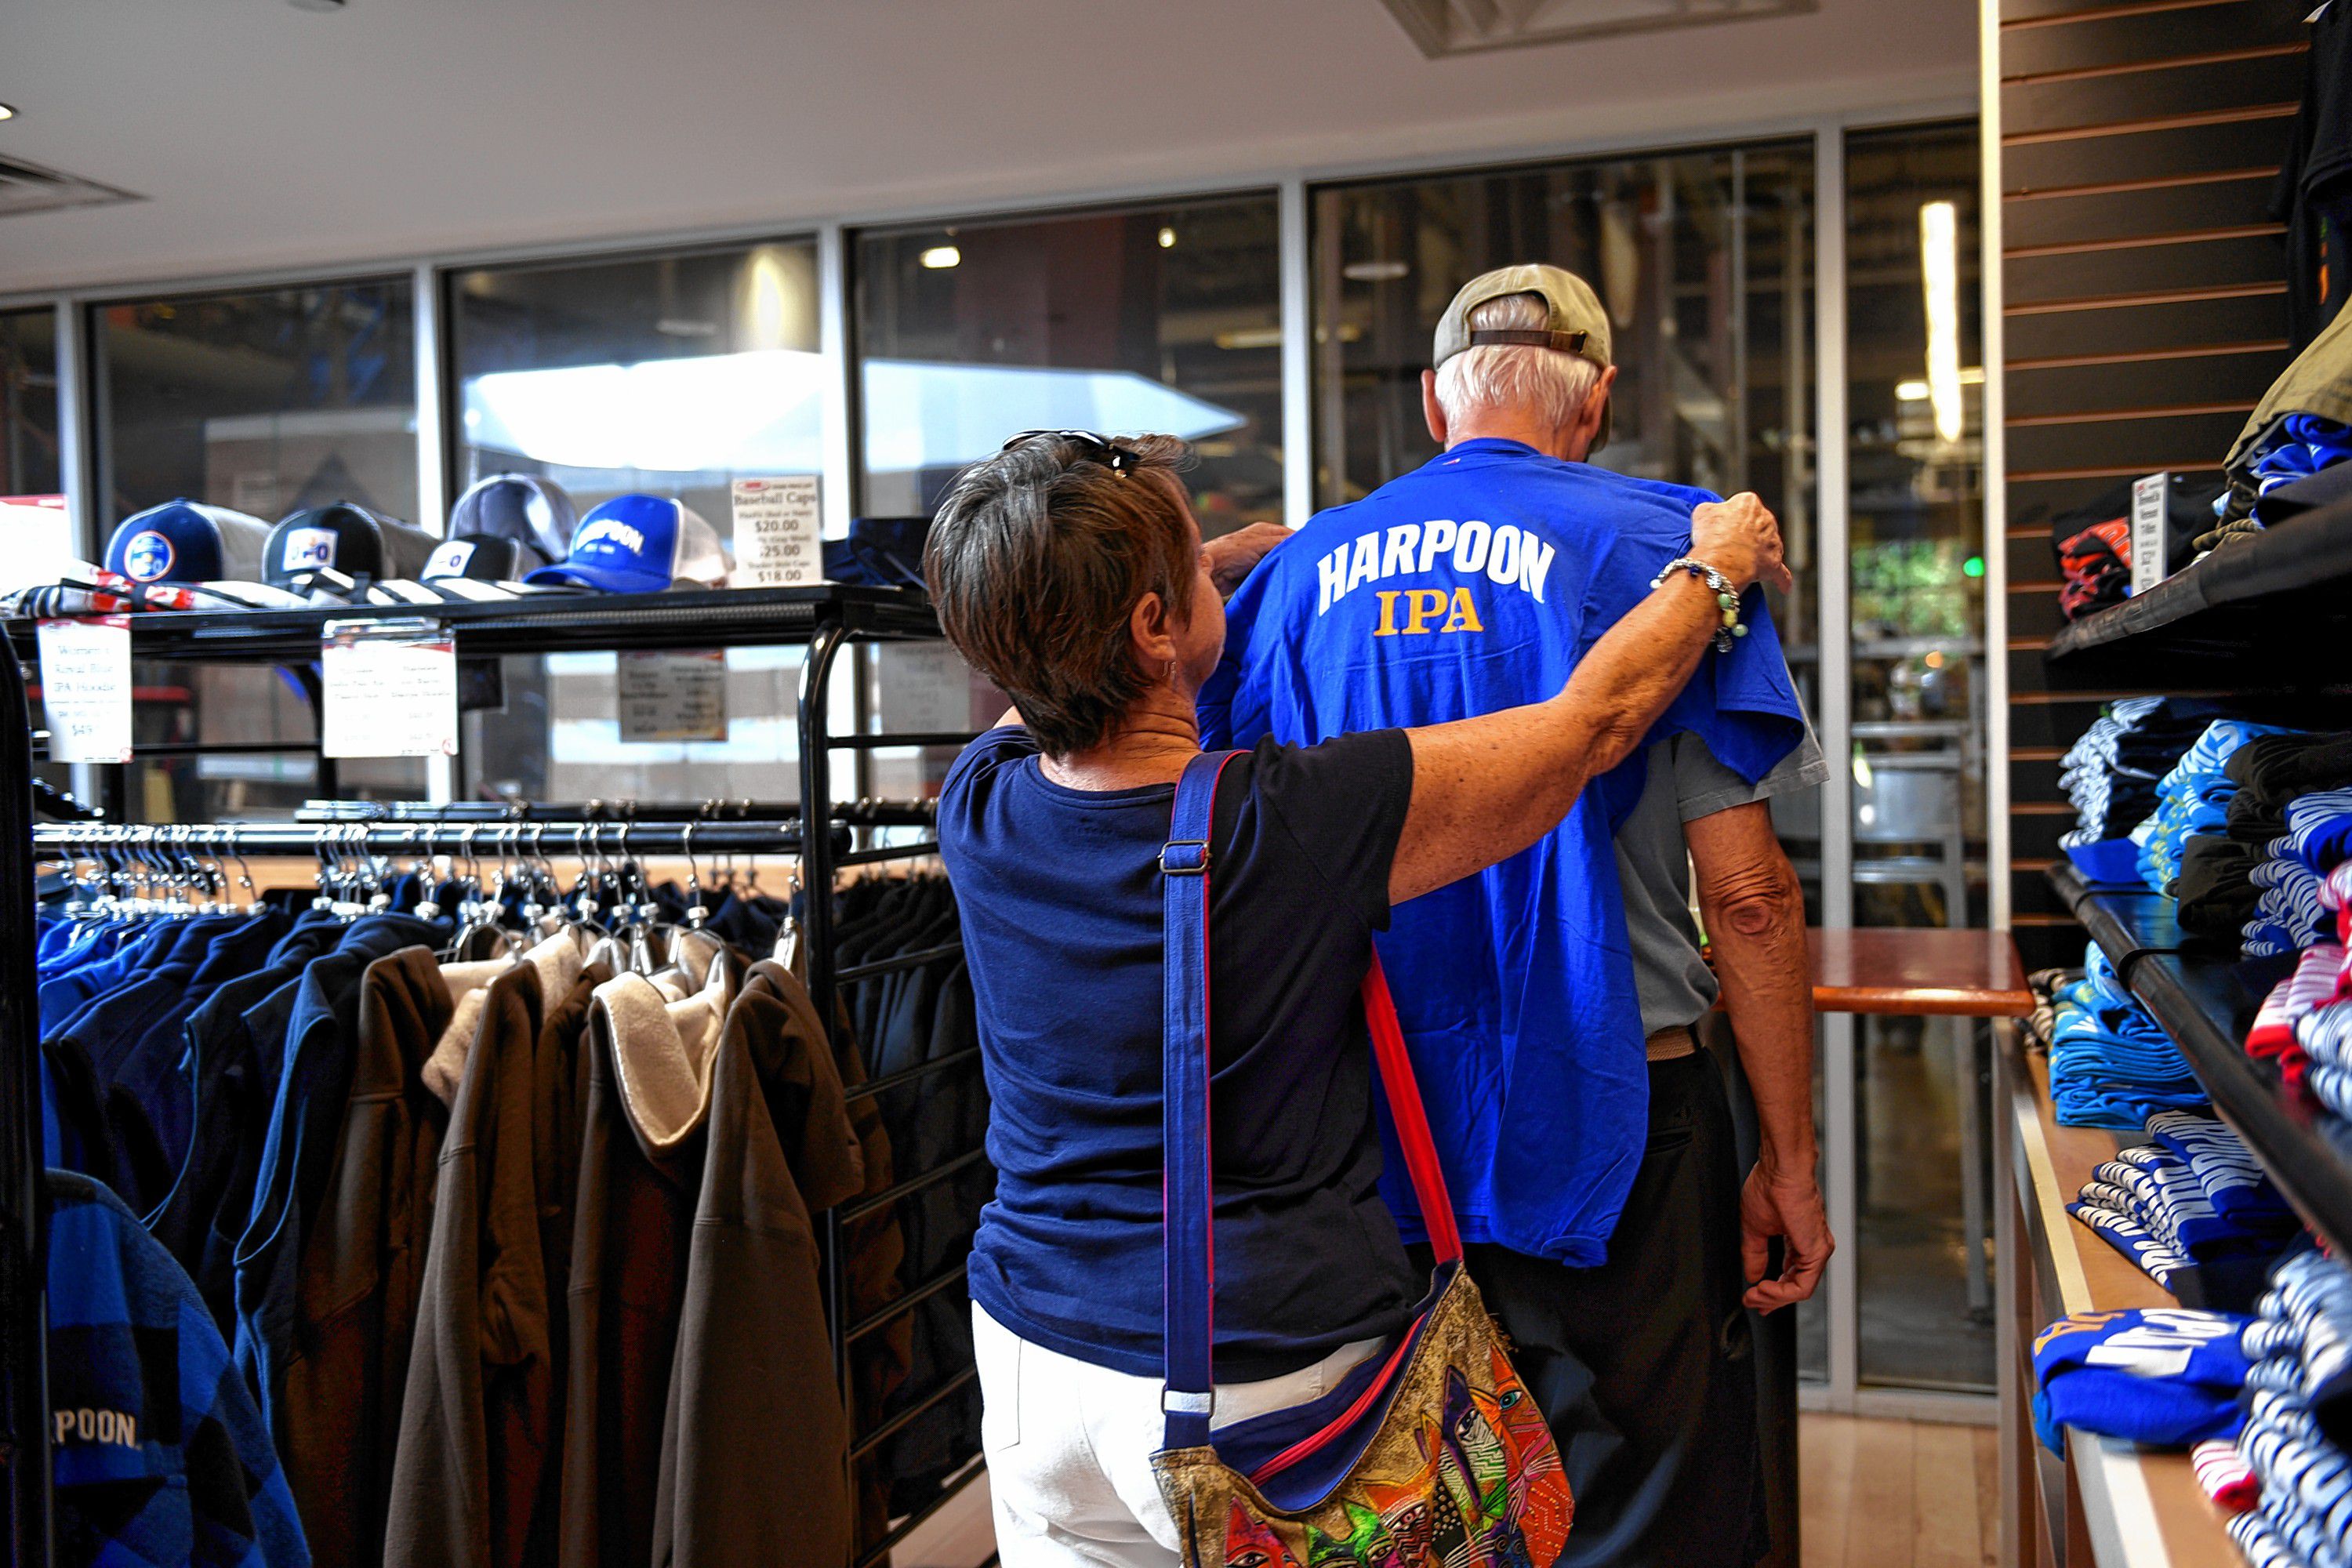 Toni Yahres sizes a shirt on her husband John Yahres, of Venice, Fla., at Harpoon Brewery in Windsor, Vt., on Sept. 13, 2016. (Valley News - Jennifer Hauck) Copyright Valley News. May not be reprinted or used online without permission. Send requests to permission@vnews.com.